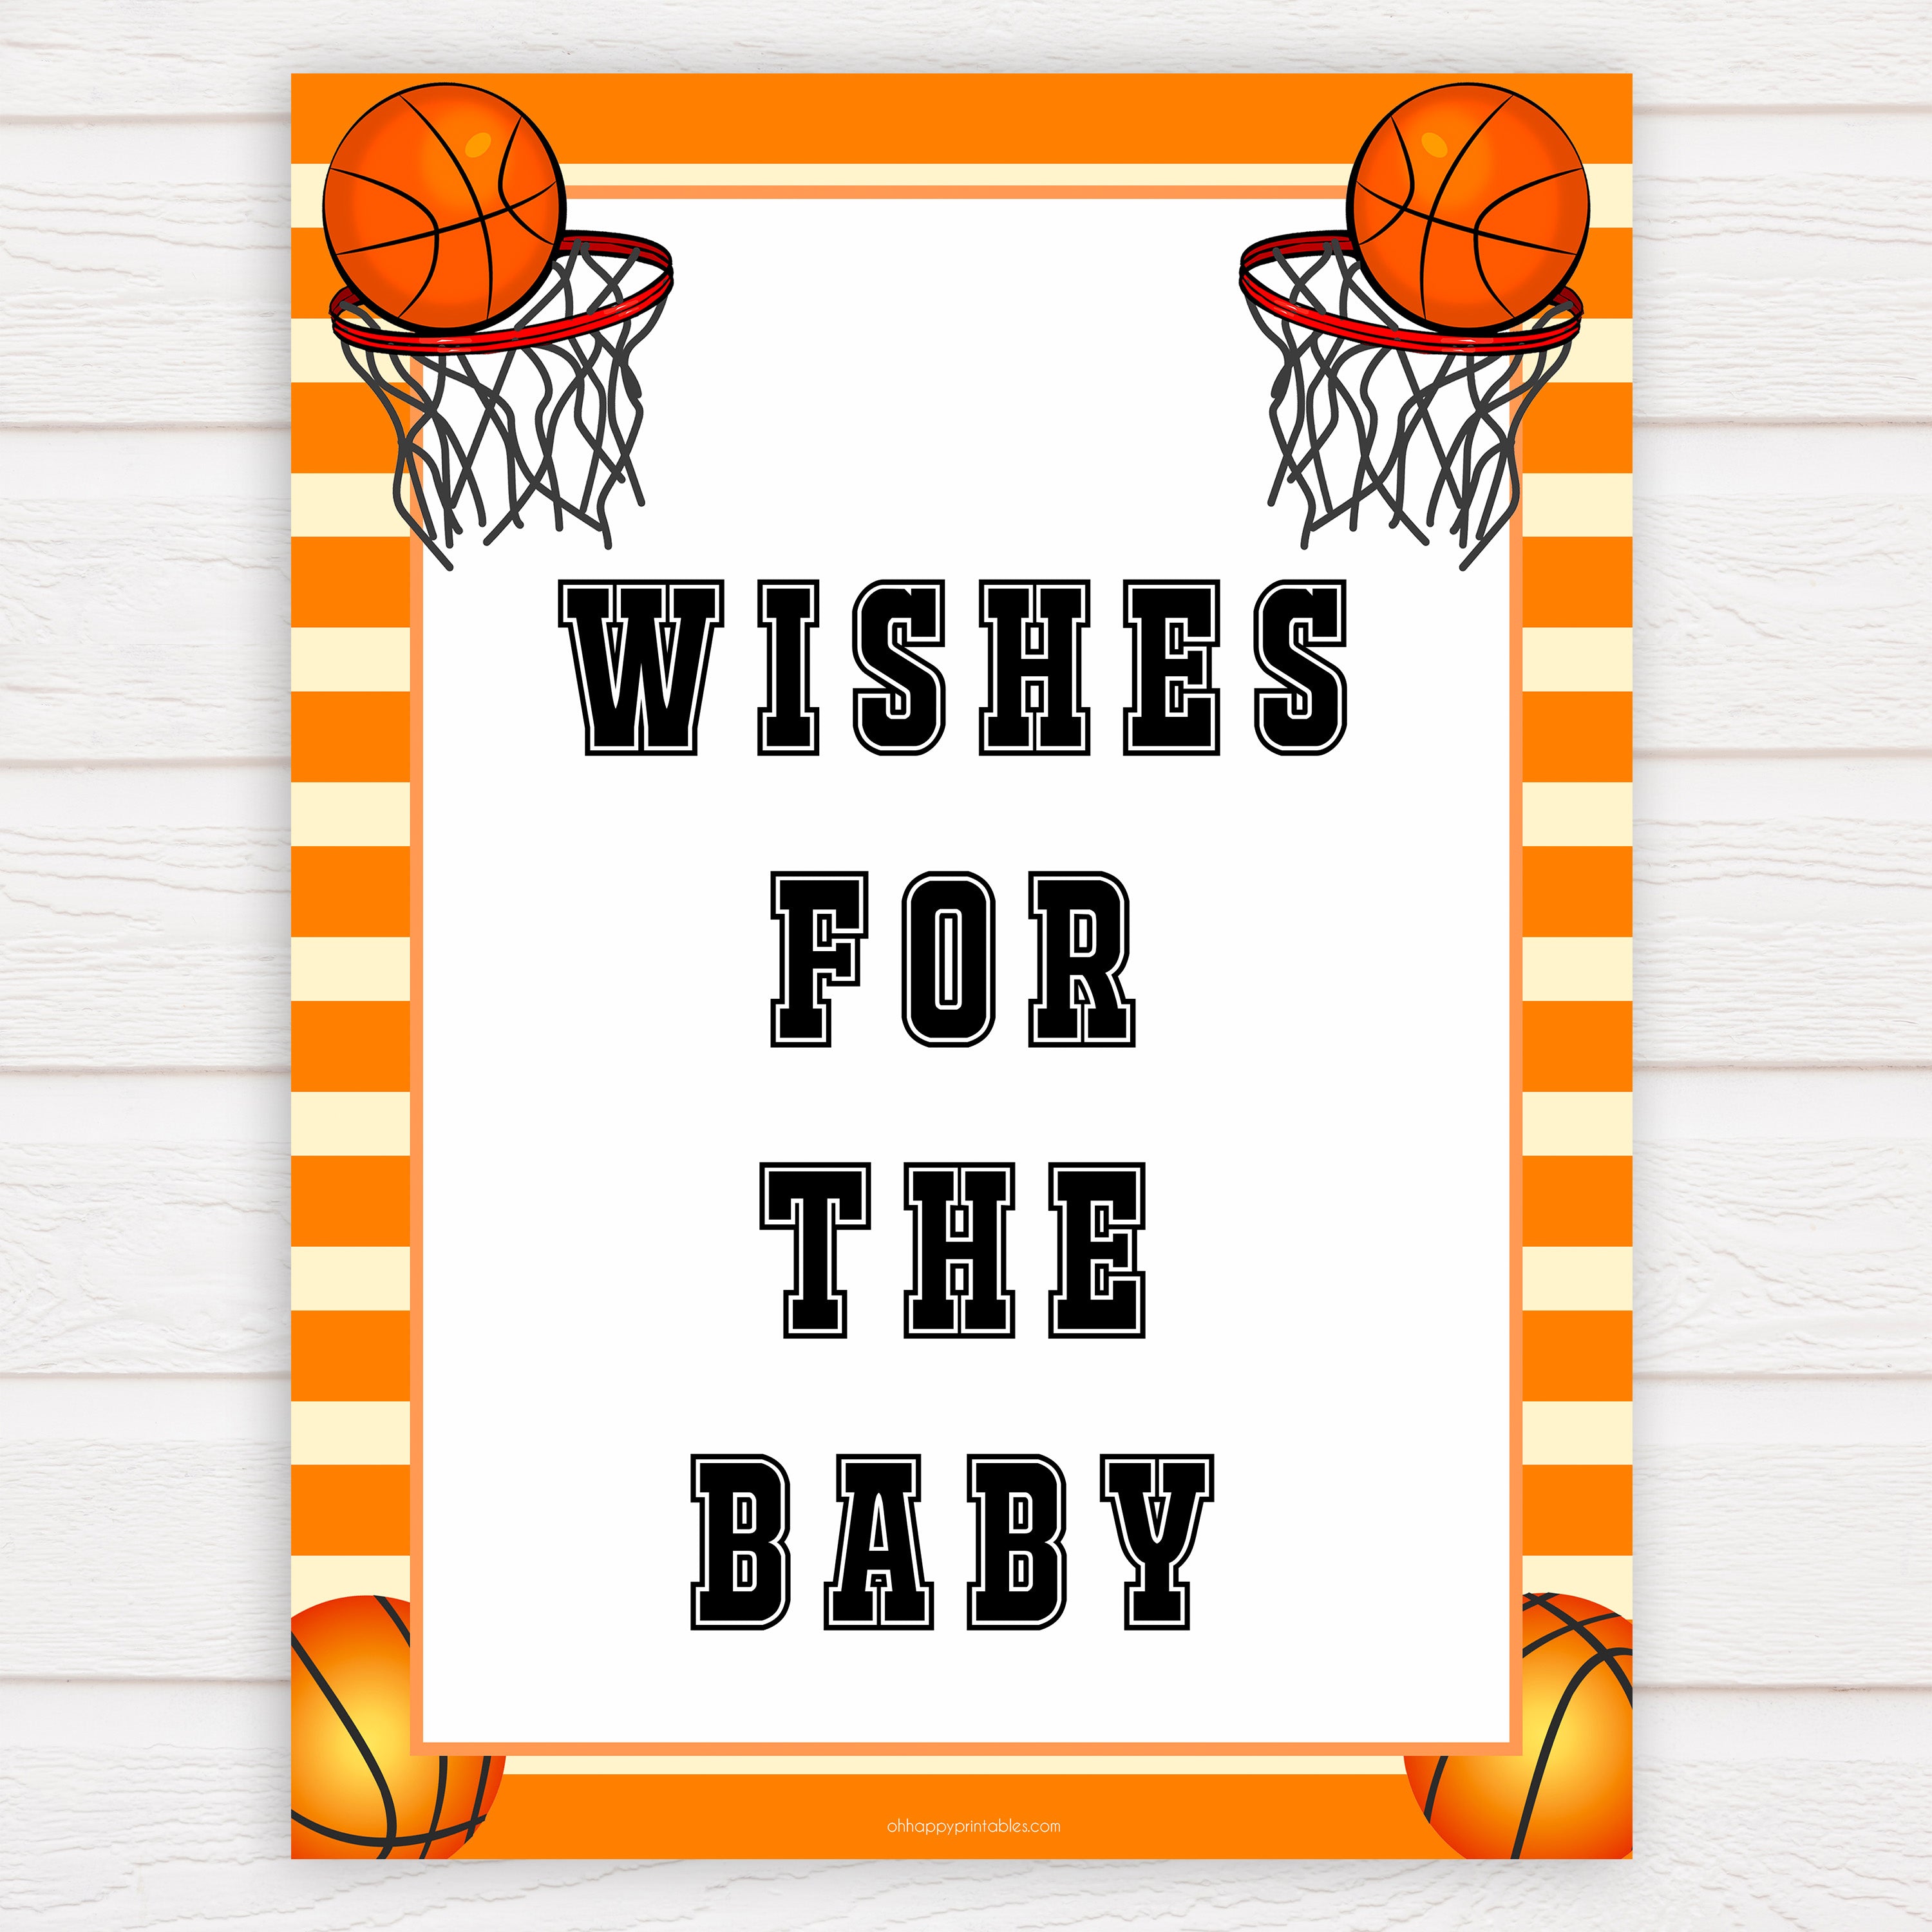 Basketball baby shower games, wishes for the baby baby game, printable baby games, basket baby games, baby shower games, basketball baby shower idea, fun baby games, popular baby games